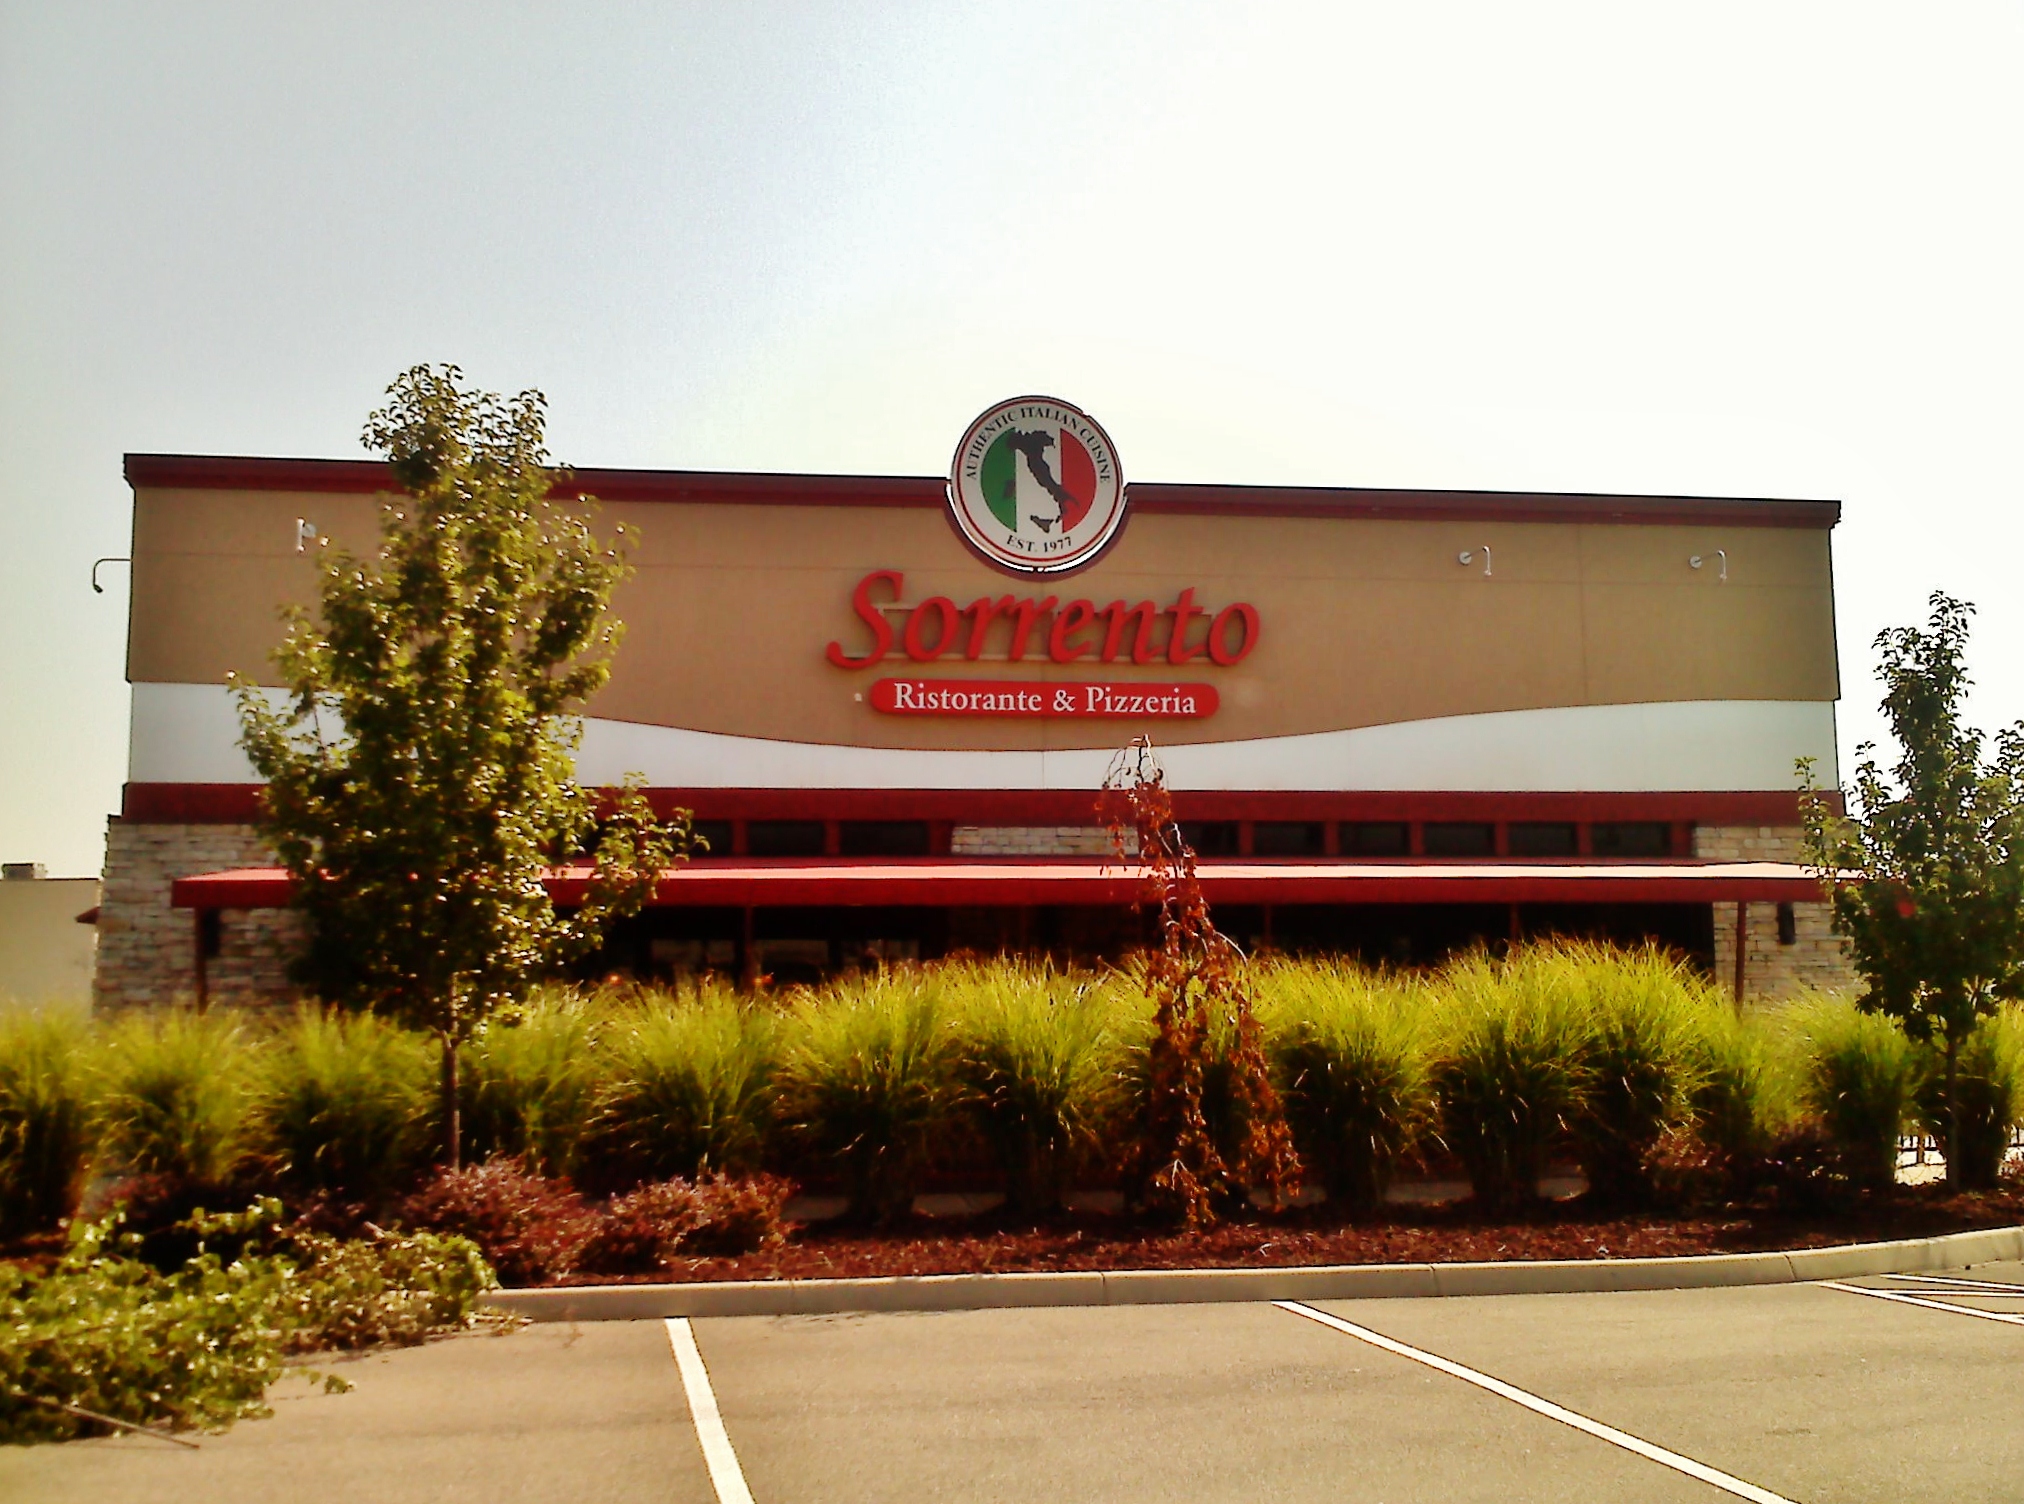 a building with landscaping next to it that has a large sign on the front